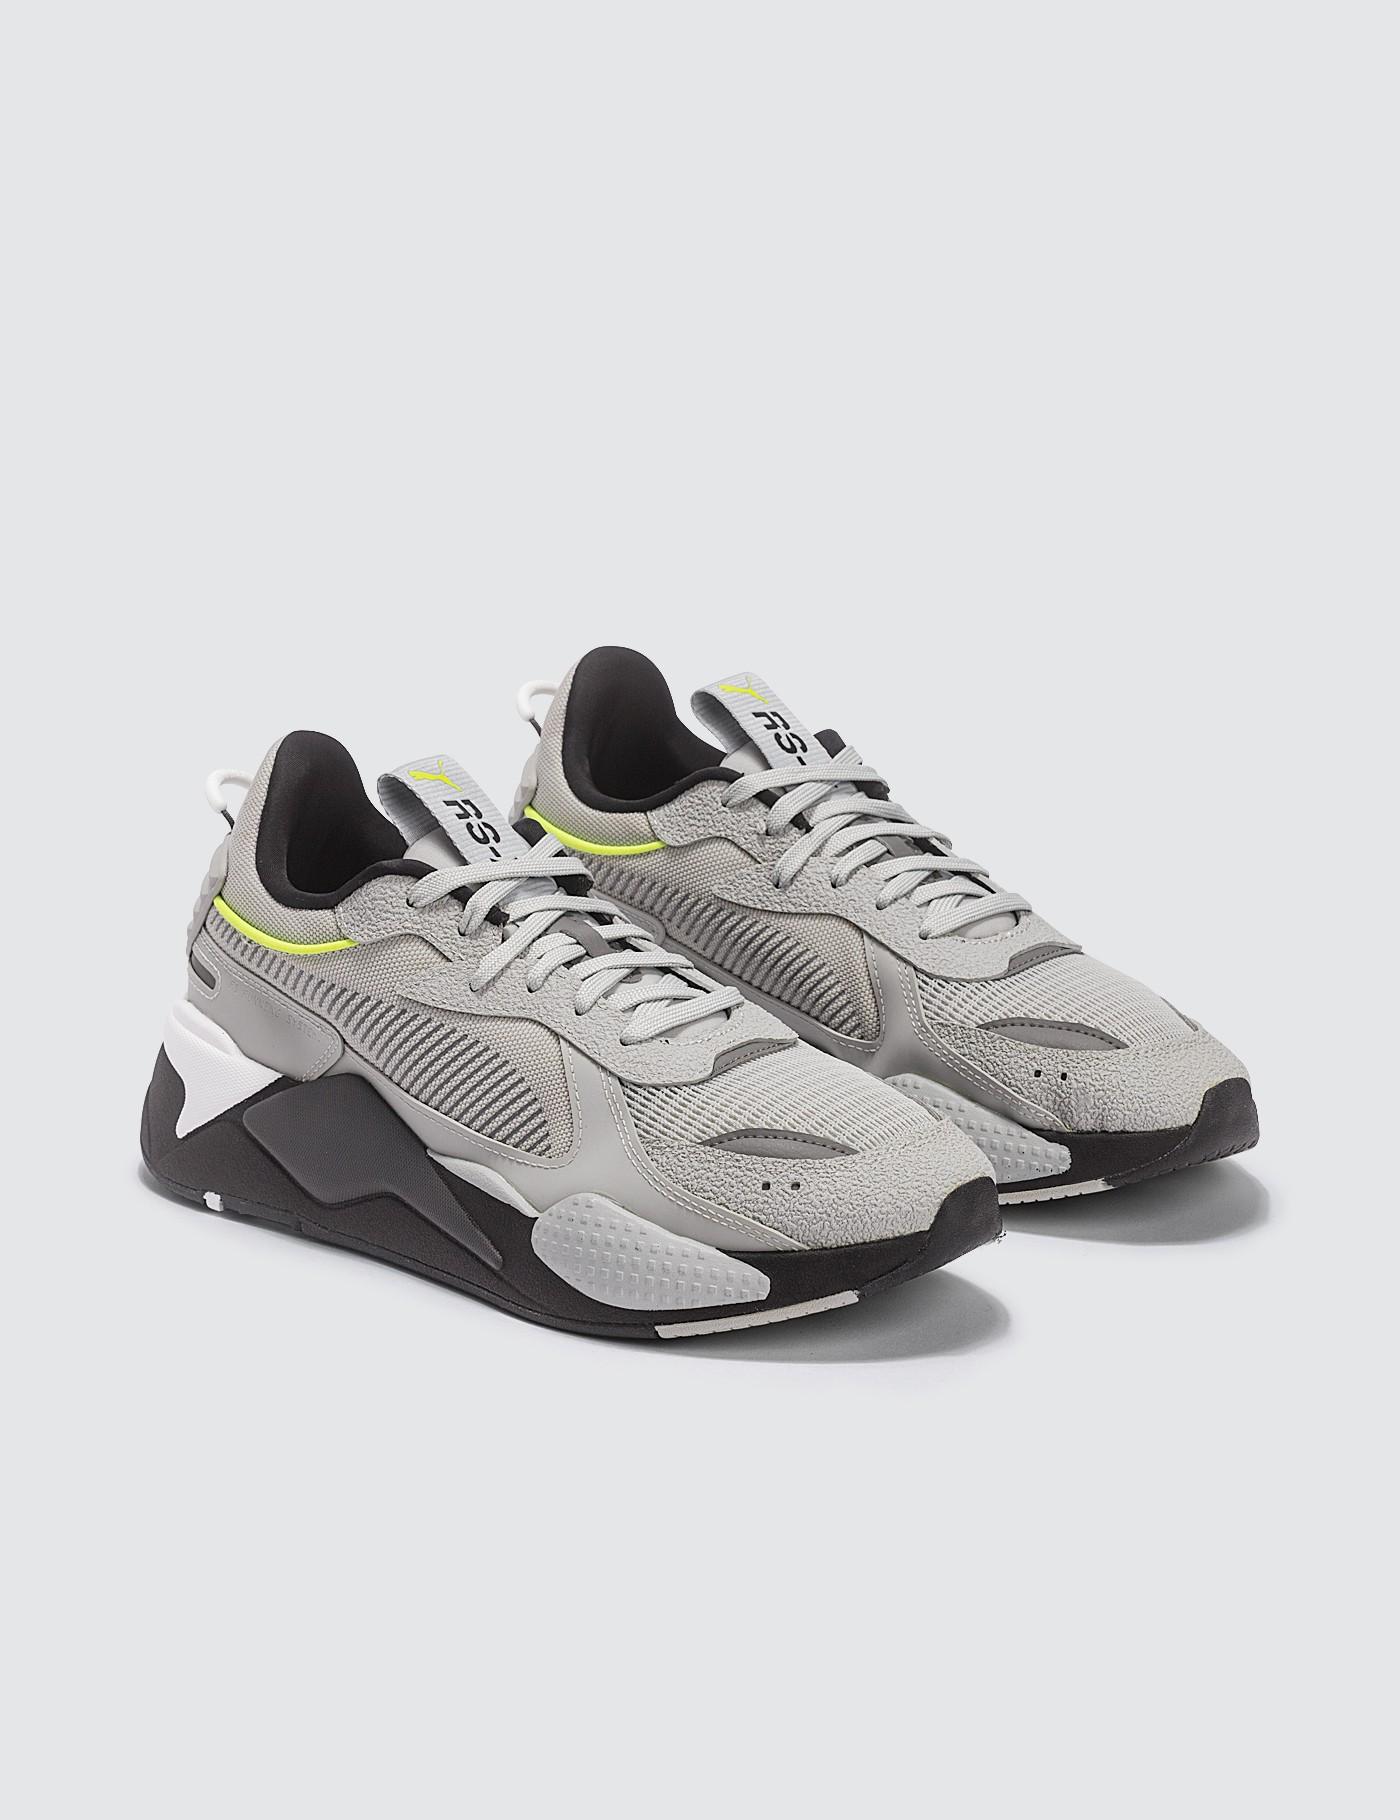 PUMA Rs-x Hard Drive in Grey (Gray) for Men - Lyst